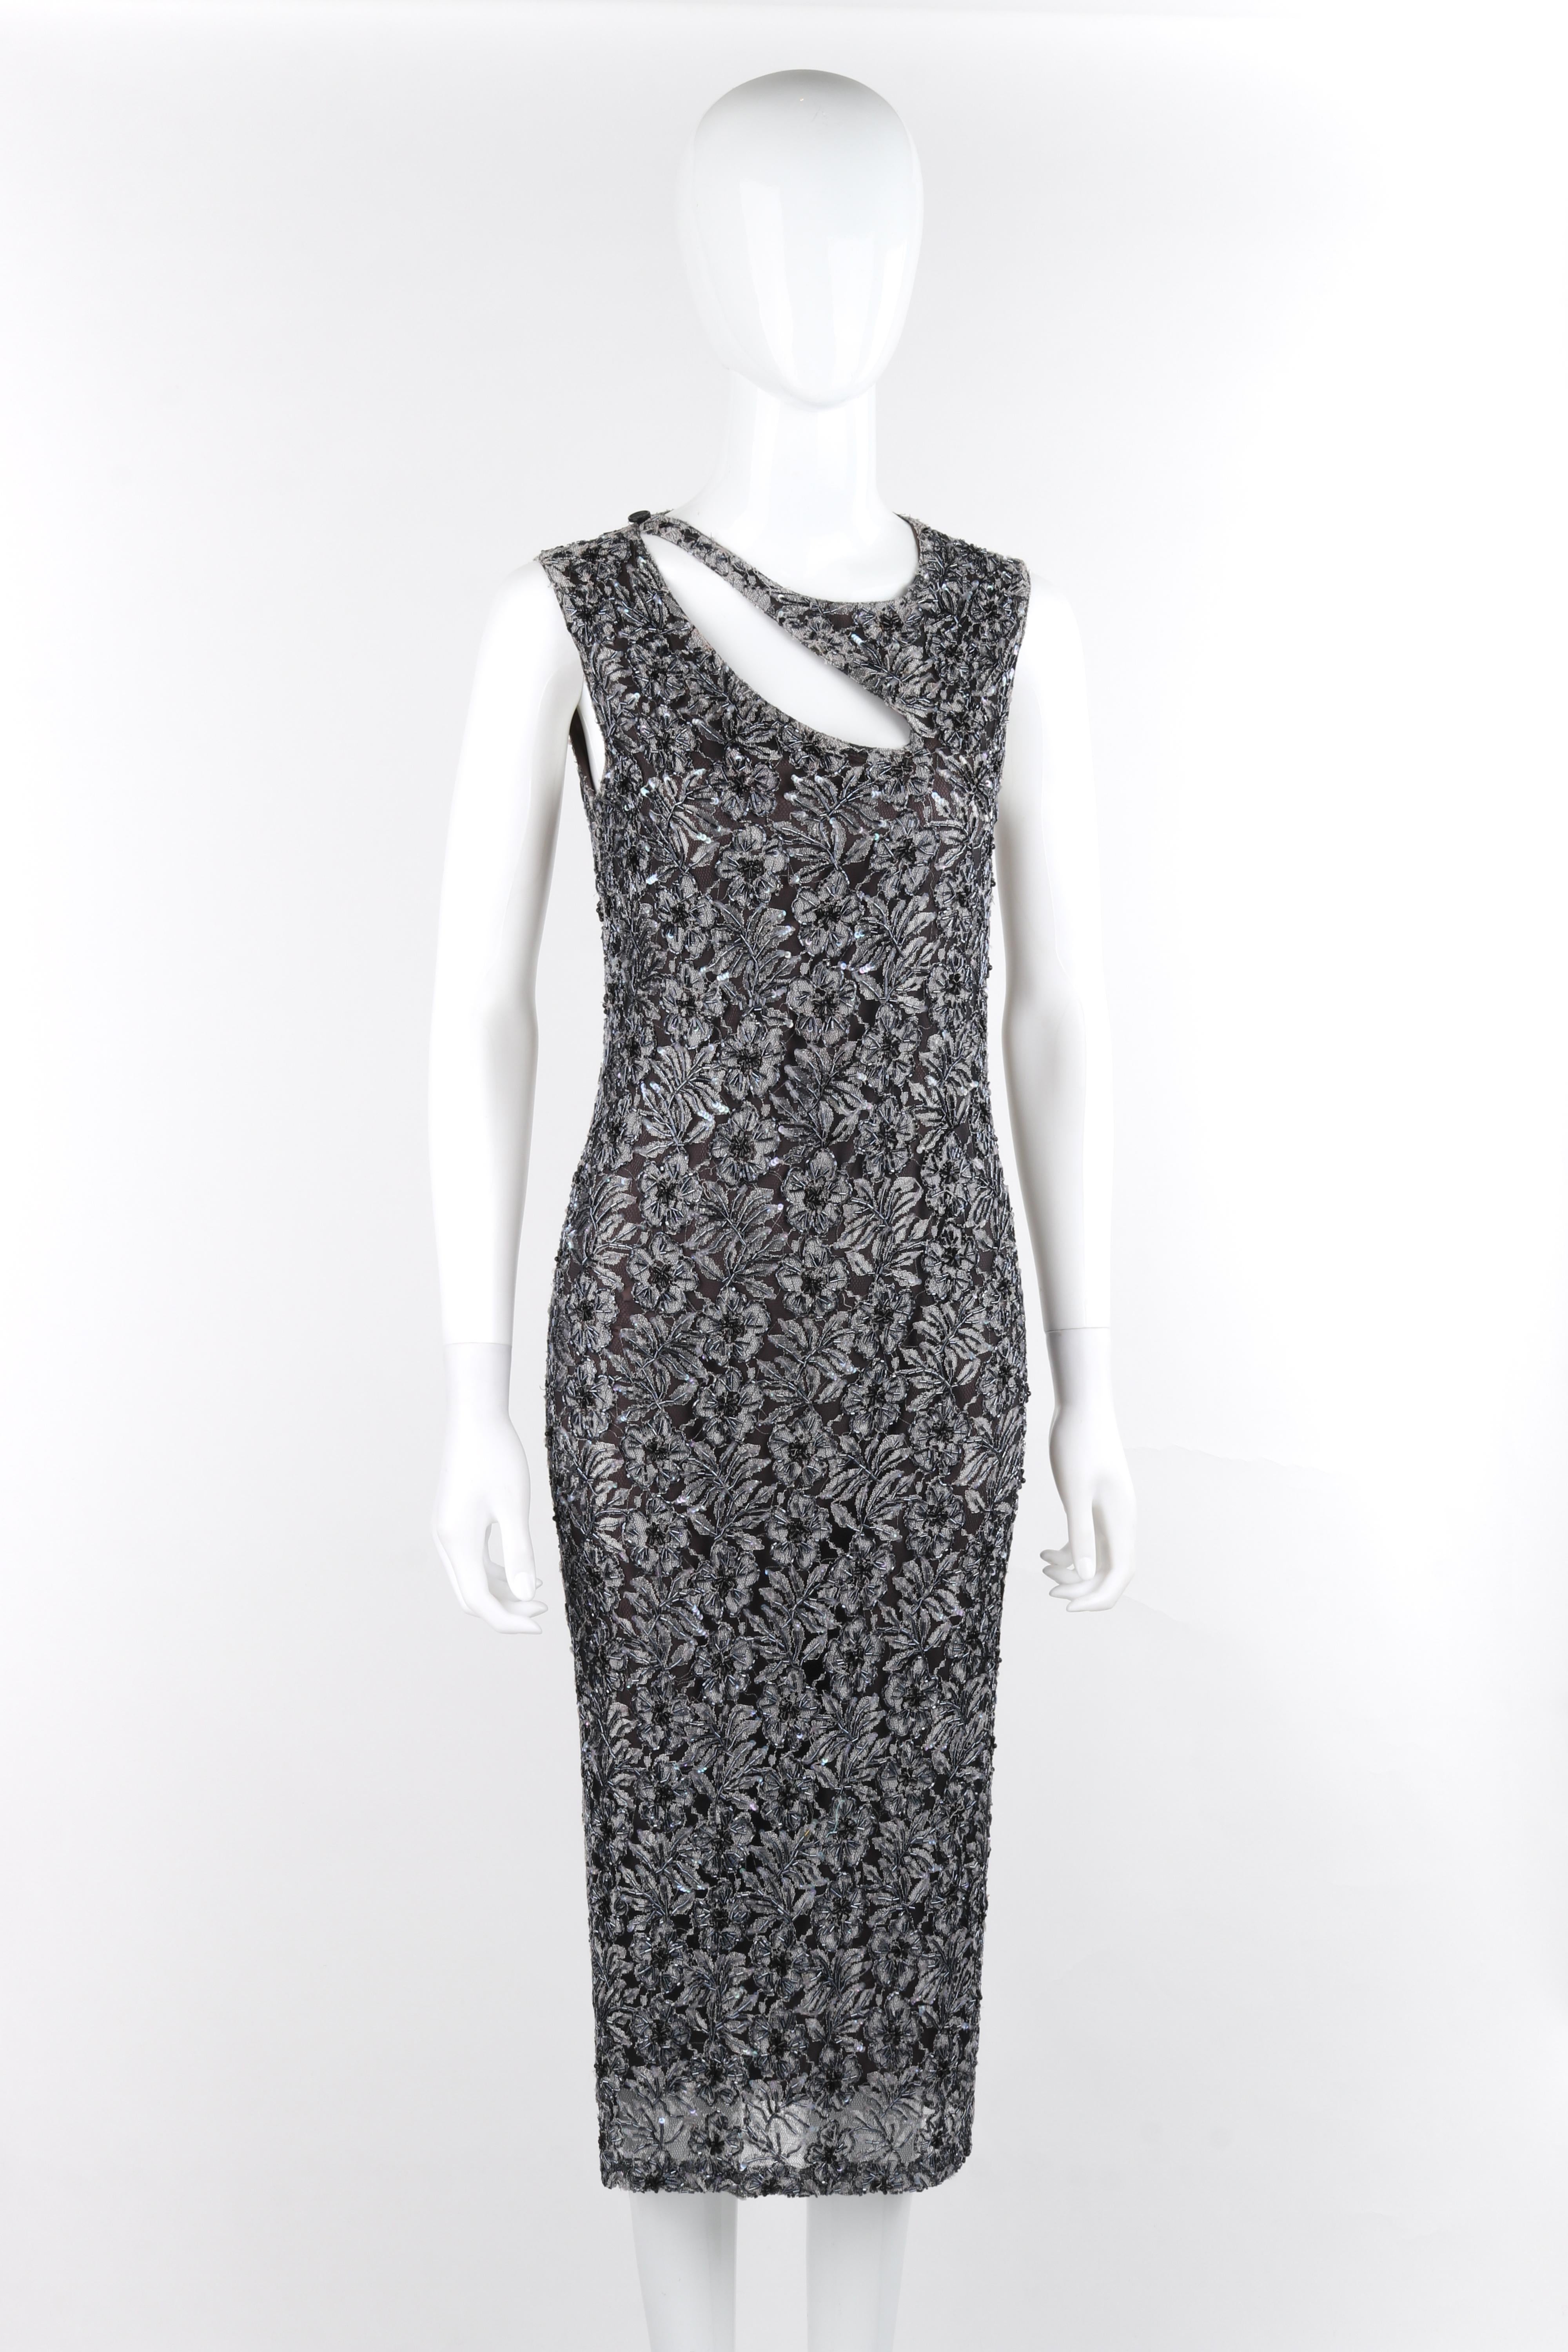 Women's ALEXANDER McQUEEN c.1999 Vtg Grey Sequin Beaded Lace Embellished Cutout Dress For Sale